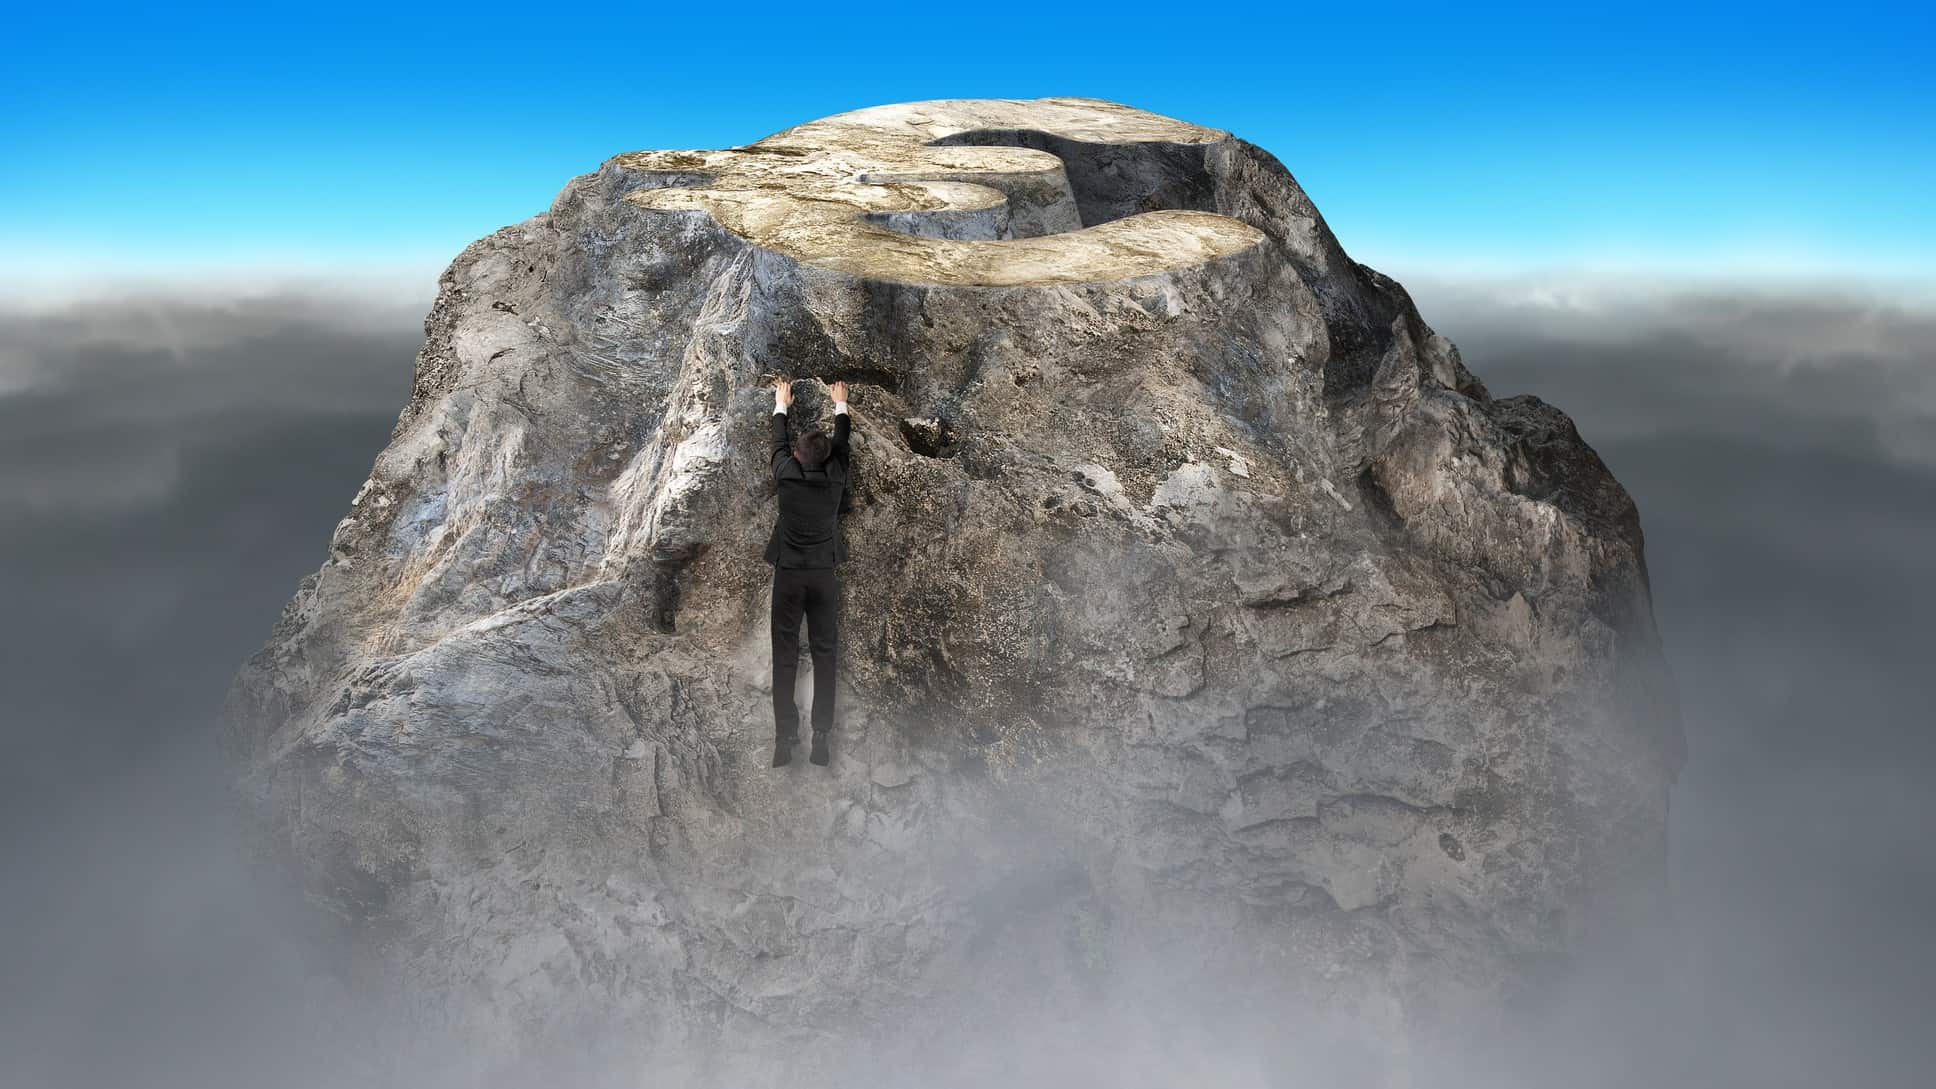 a man in a business suit hangs on with his bare hands as he nears the top of a rocky mountain with little footholds and mist swirling around the mountain top.